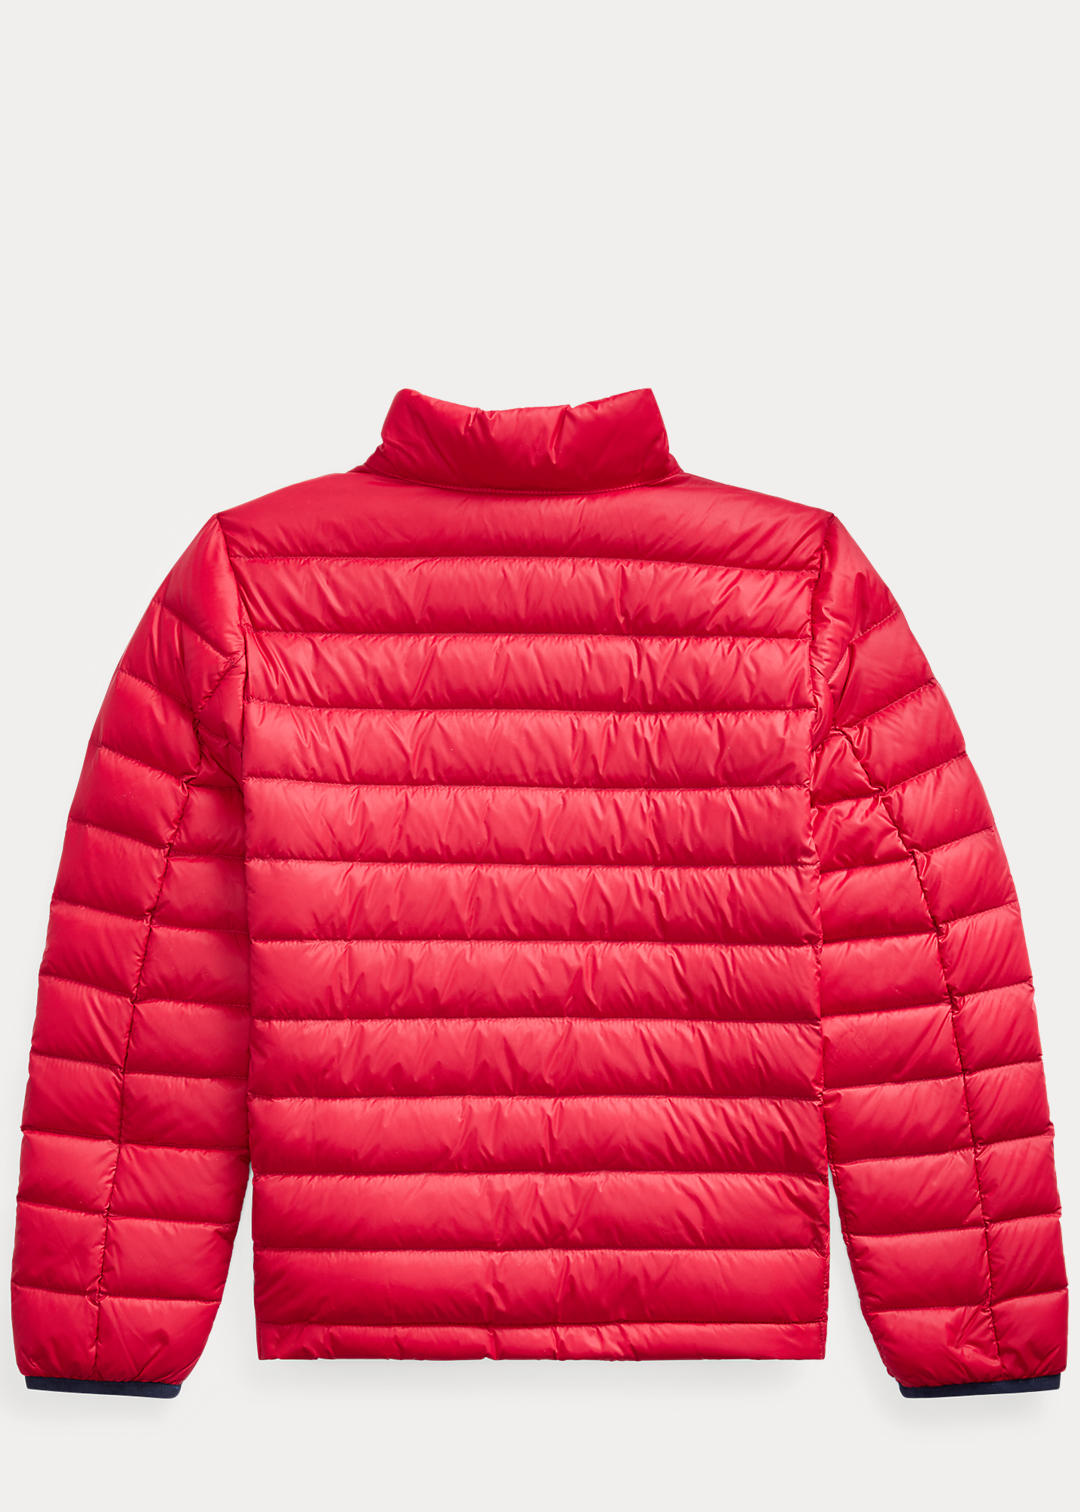 BOYS 6-14 YEARS Packable Quilted Down Jacket 2